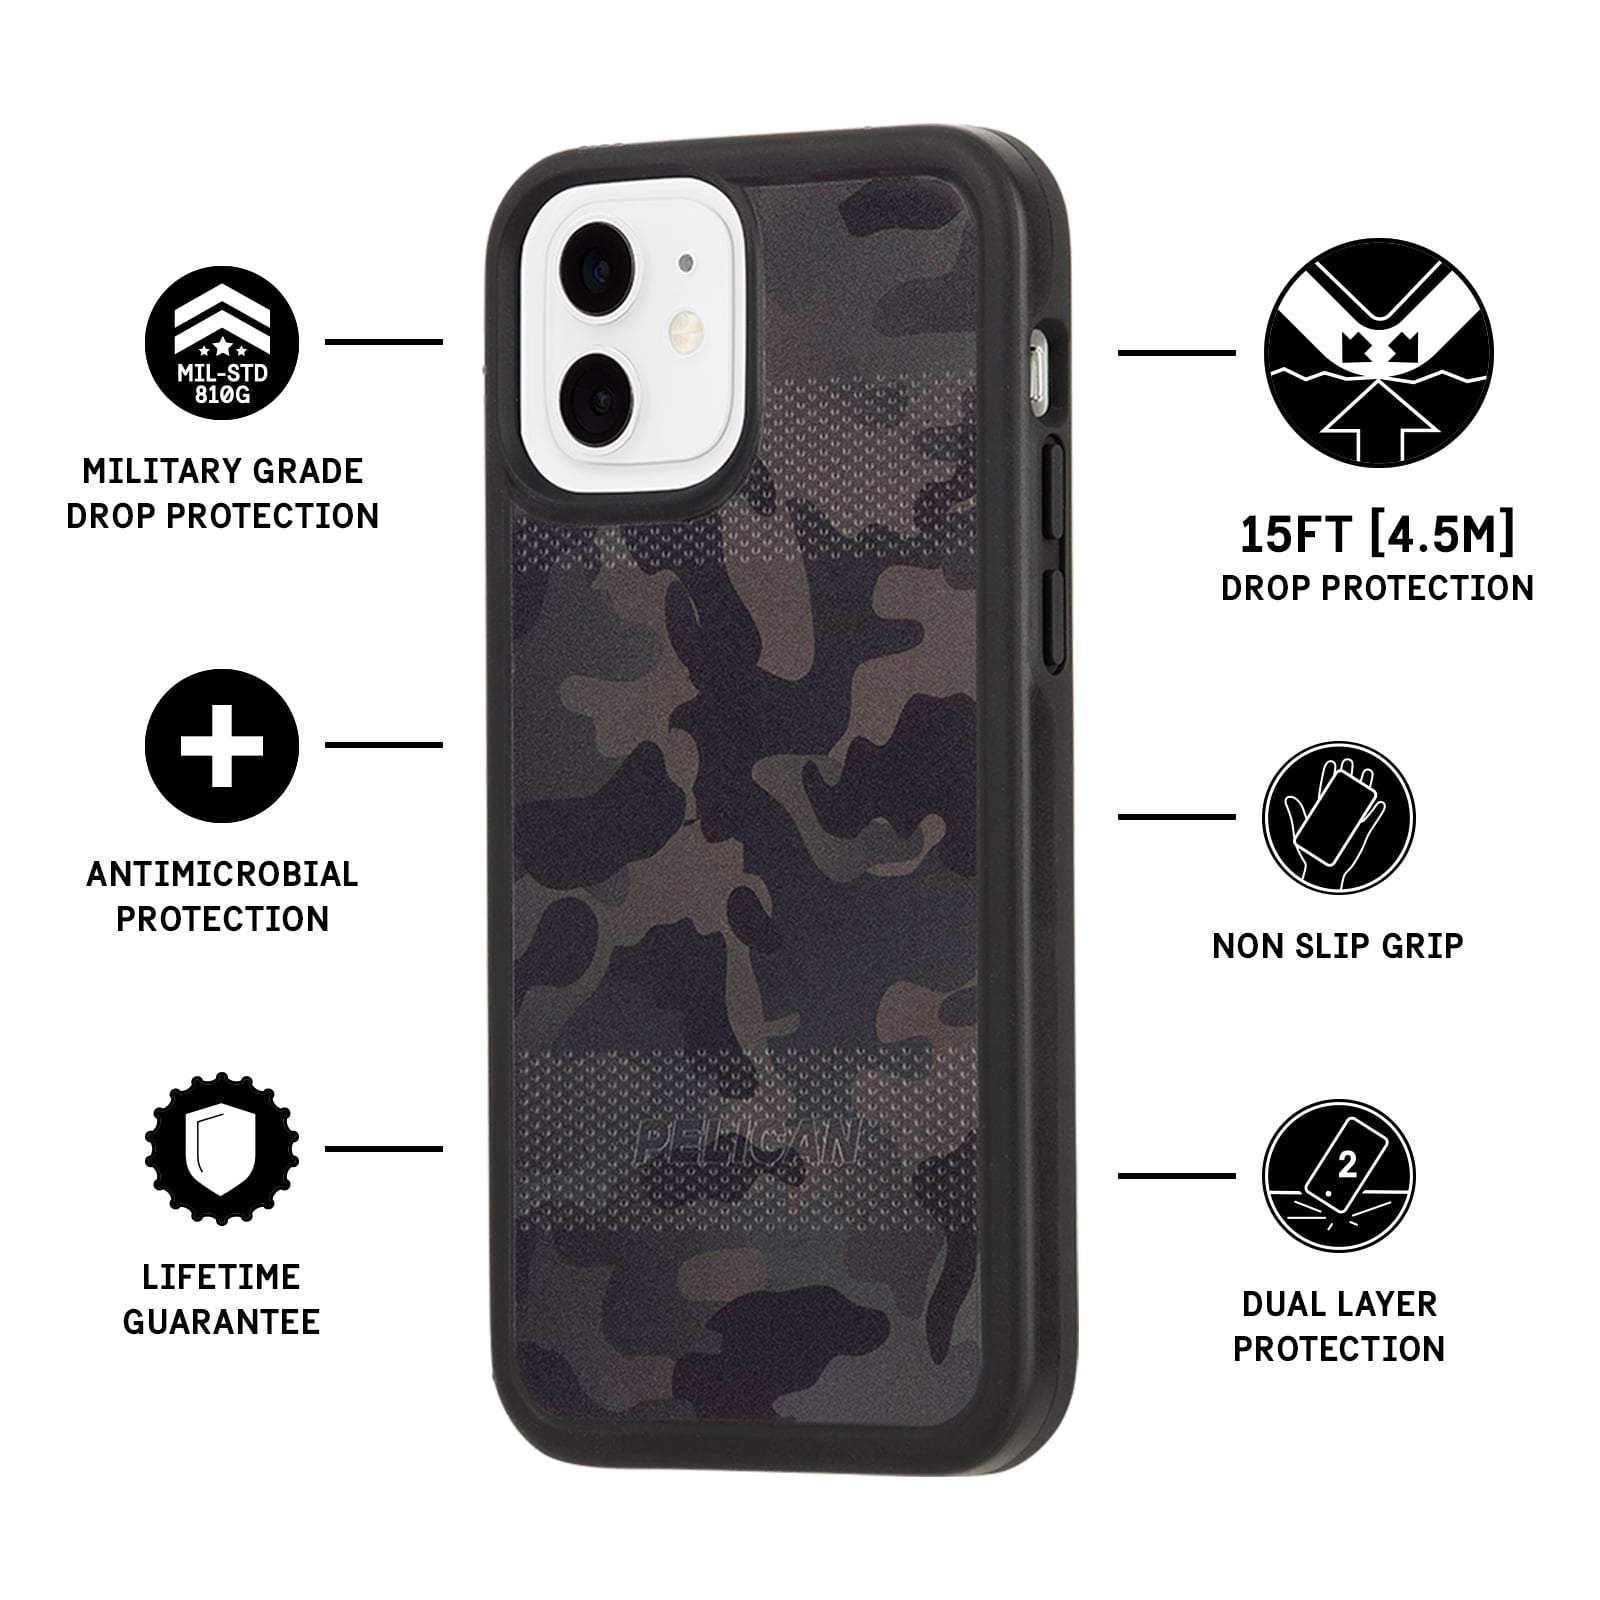 Features military grade drop protection, antimicrobial protection, lifetime guarantee, 15 ft drop protection, non slip grip, dual layer protection. color::Camo Green